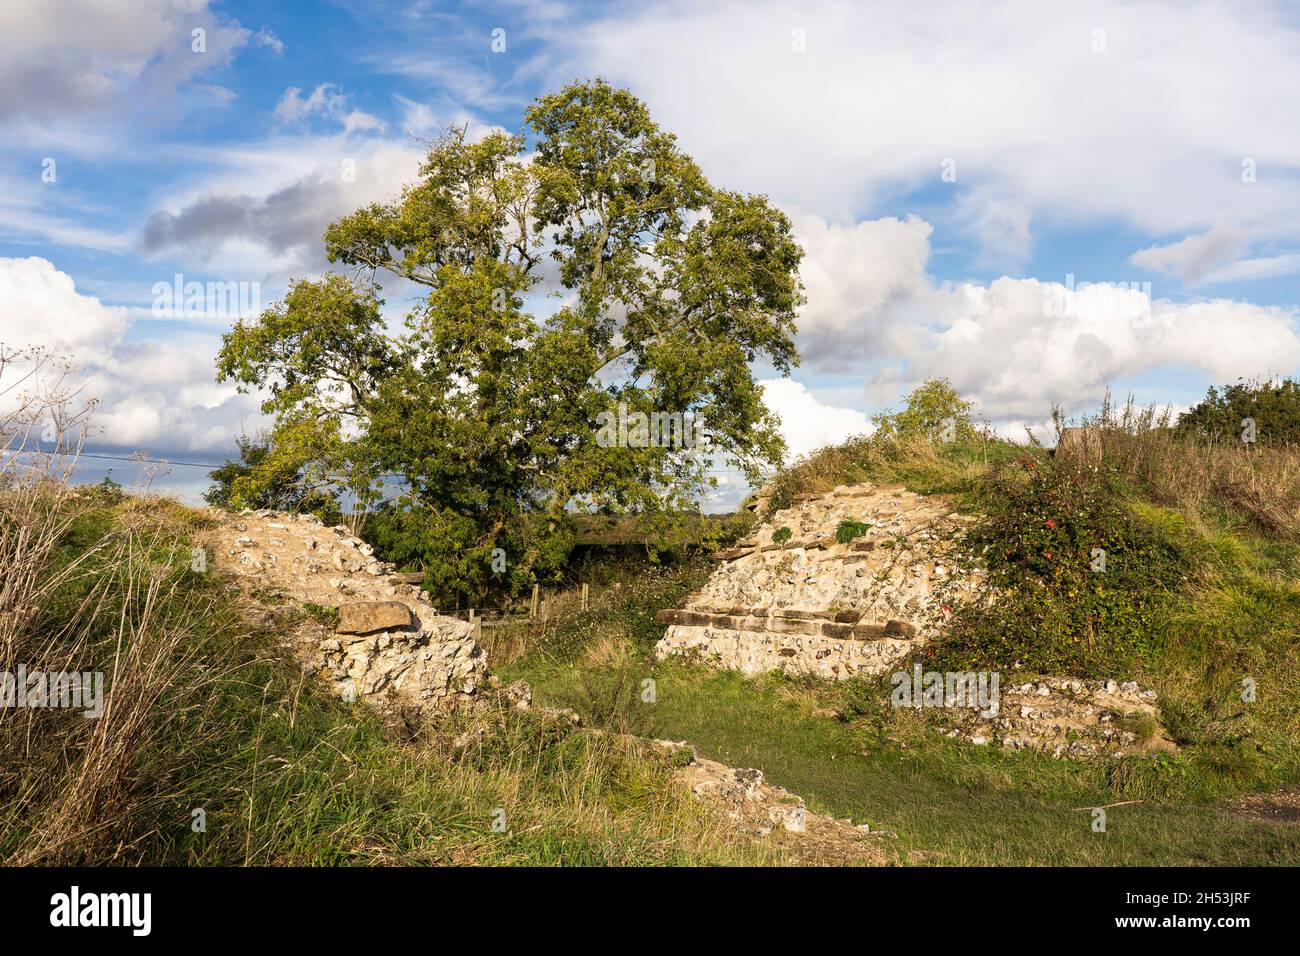 The north gate of the ruined Roman town wall showing the flint and stone core held together by lime mortar at Roman Silchester. Hampshire, UK Stock Photo